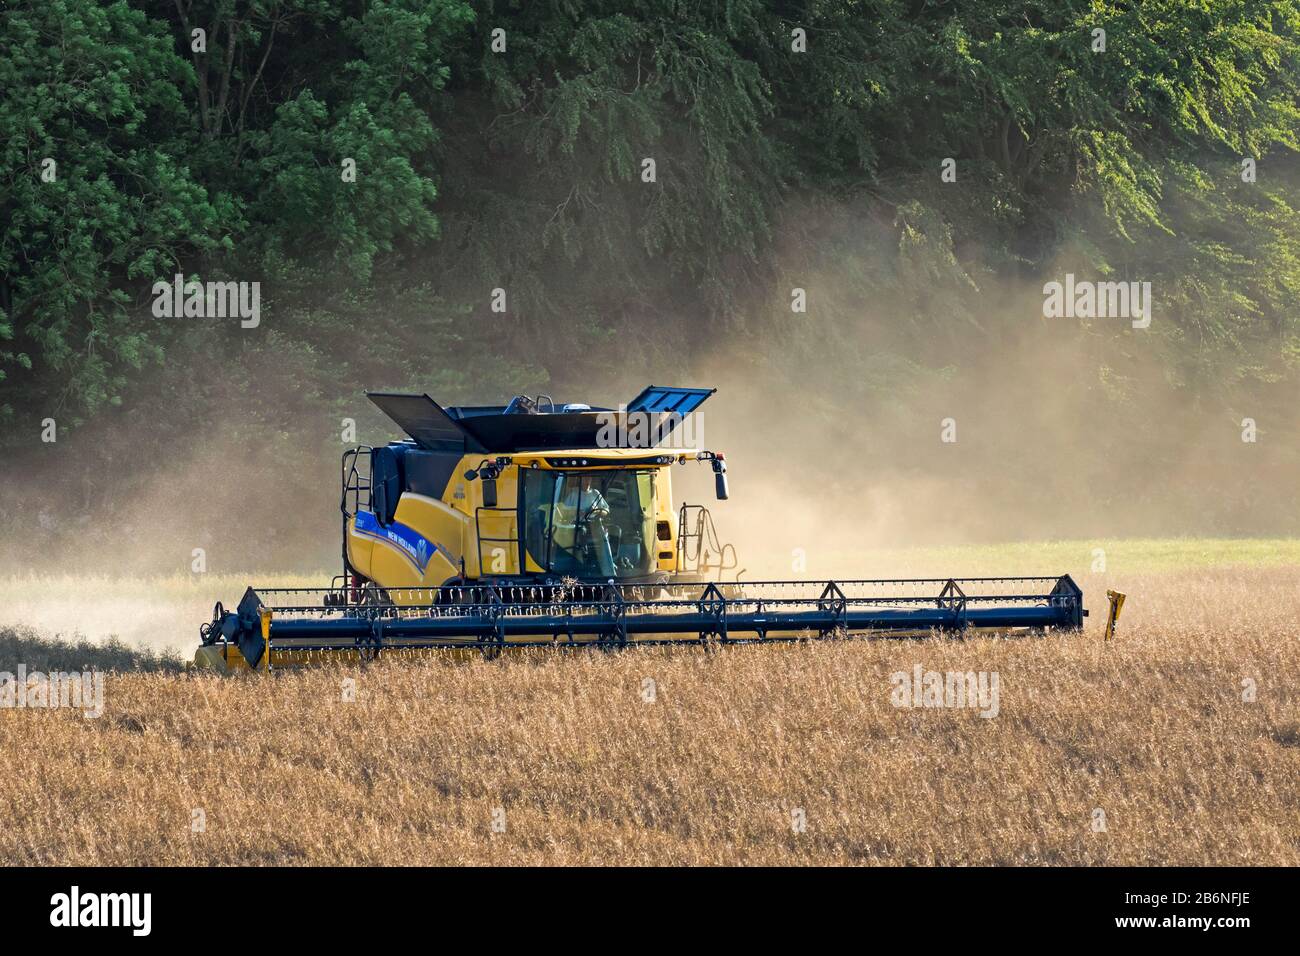 New Holland CR9.90 Combine Harvester harvesting rapeseed crop in field in summer for production of animal feed, edible vegetable oils and biodiesel Stock Photo